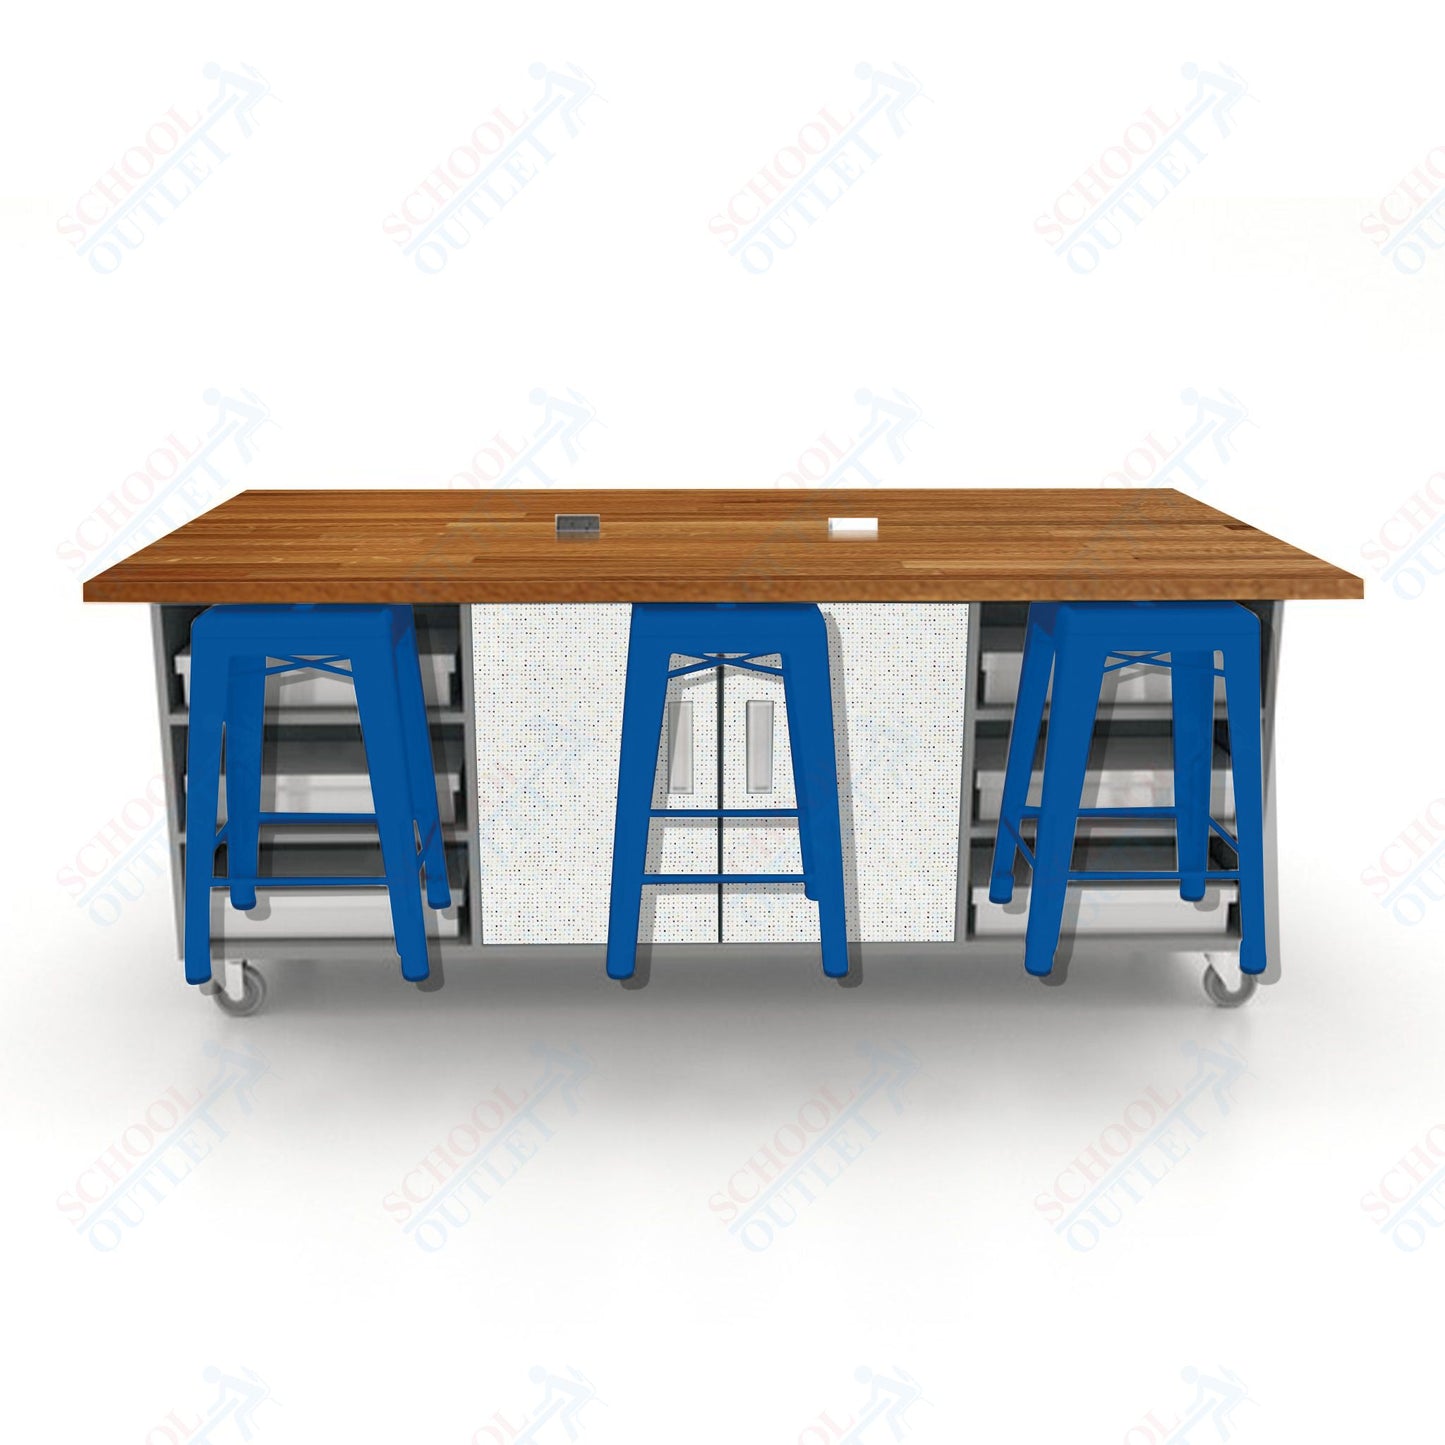 CEF ED Double Table 36"H Butcher Block Top, Laminate Base with  6 Stools, Storage bins, and Electrical Outlets Included.